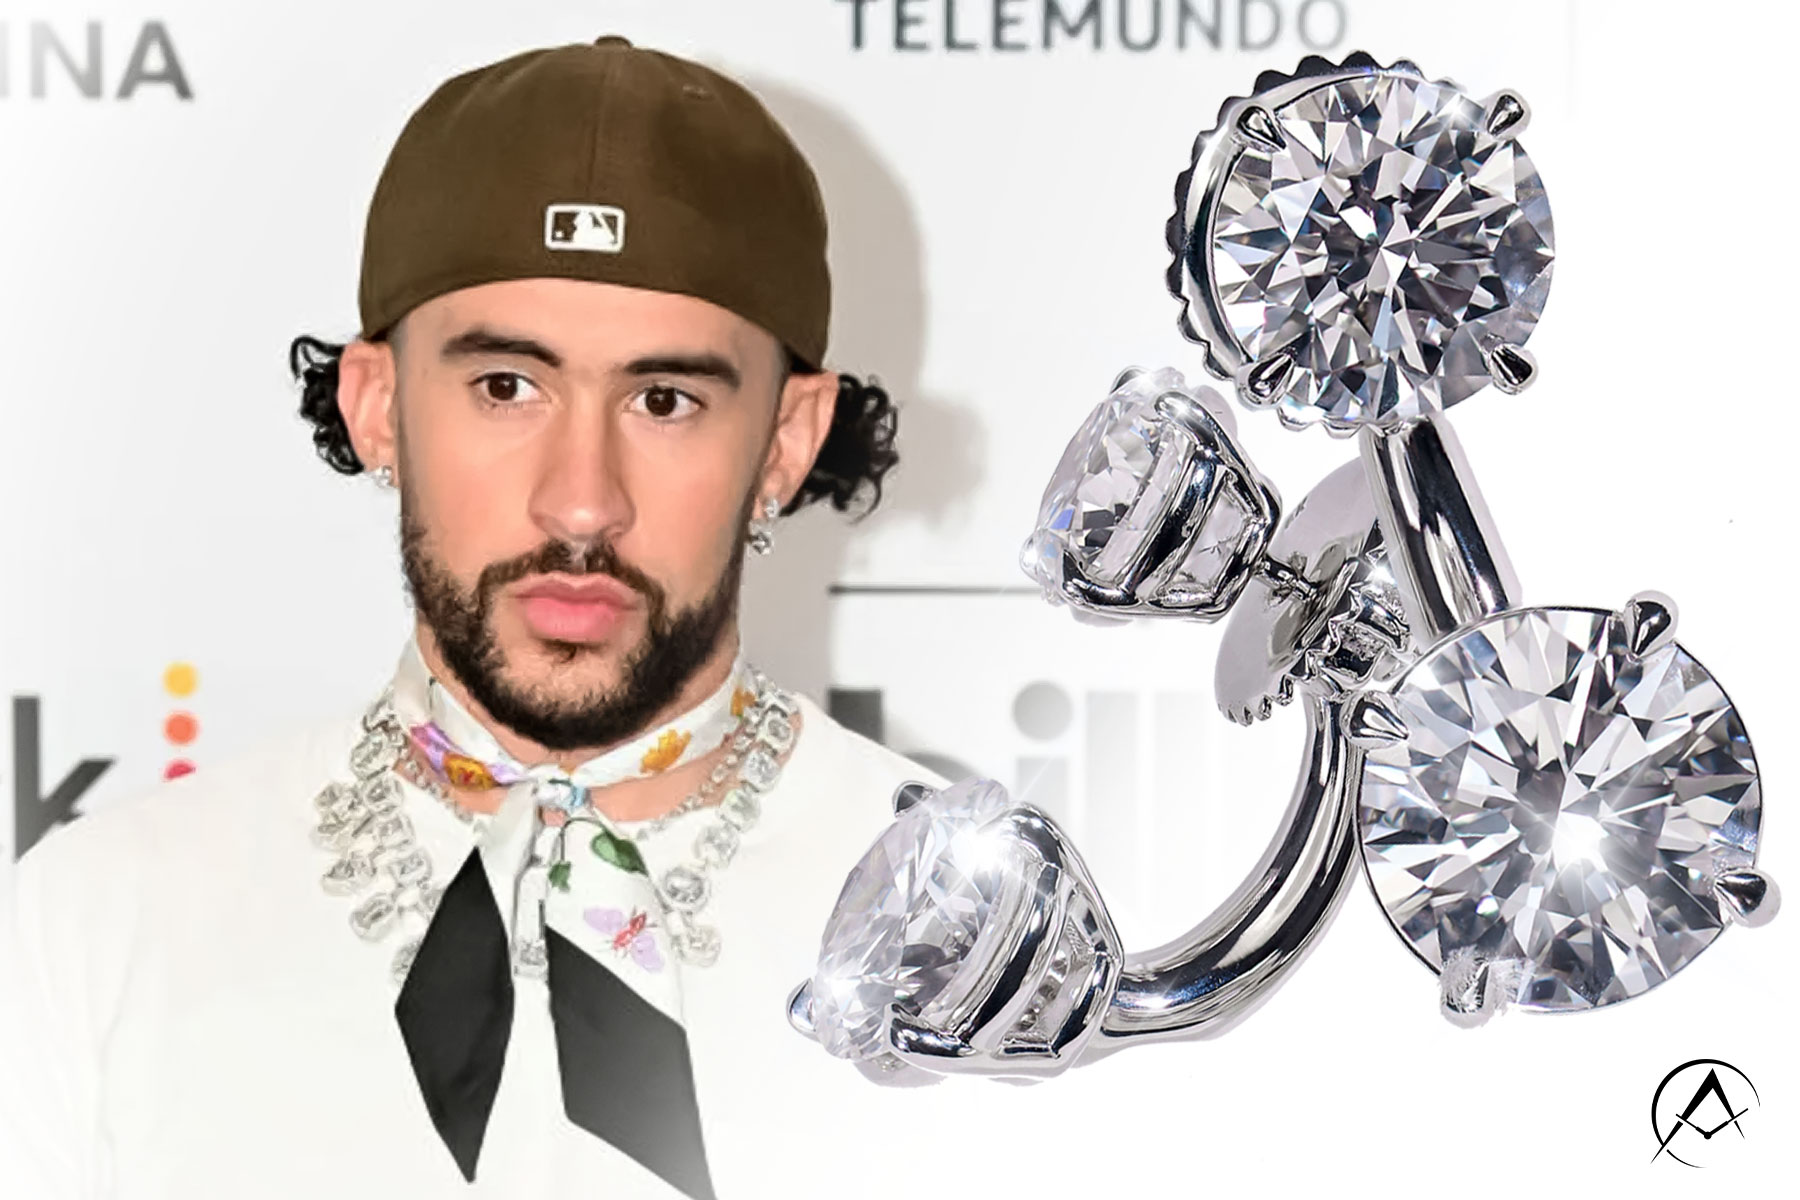 Legendary Celebrity and Singer Bad Bunny Wore These Two-Tiered Earrings to the 2023 Latin Music Billboard Awards. They are Displayed on a White Background.